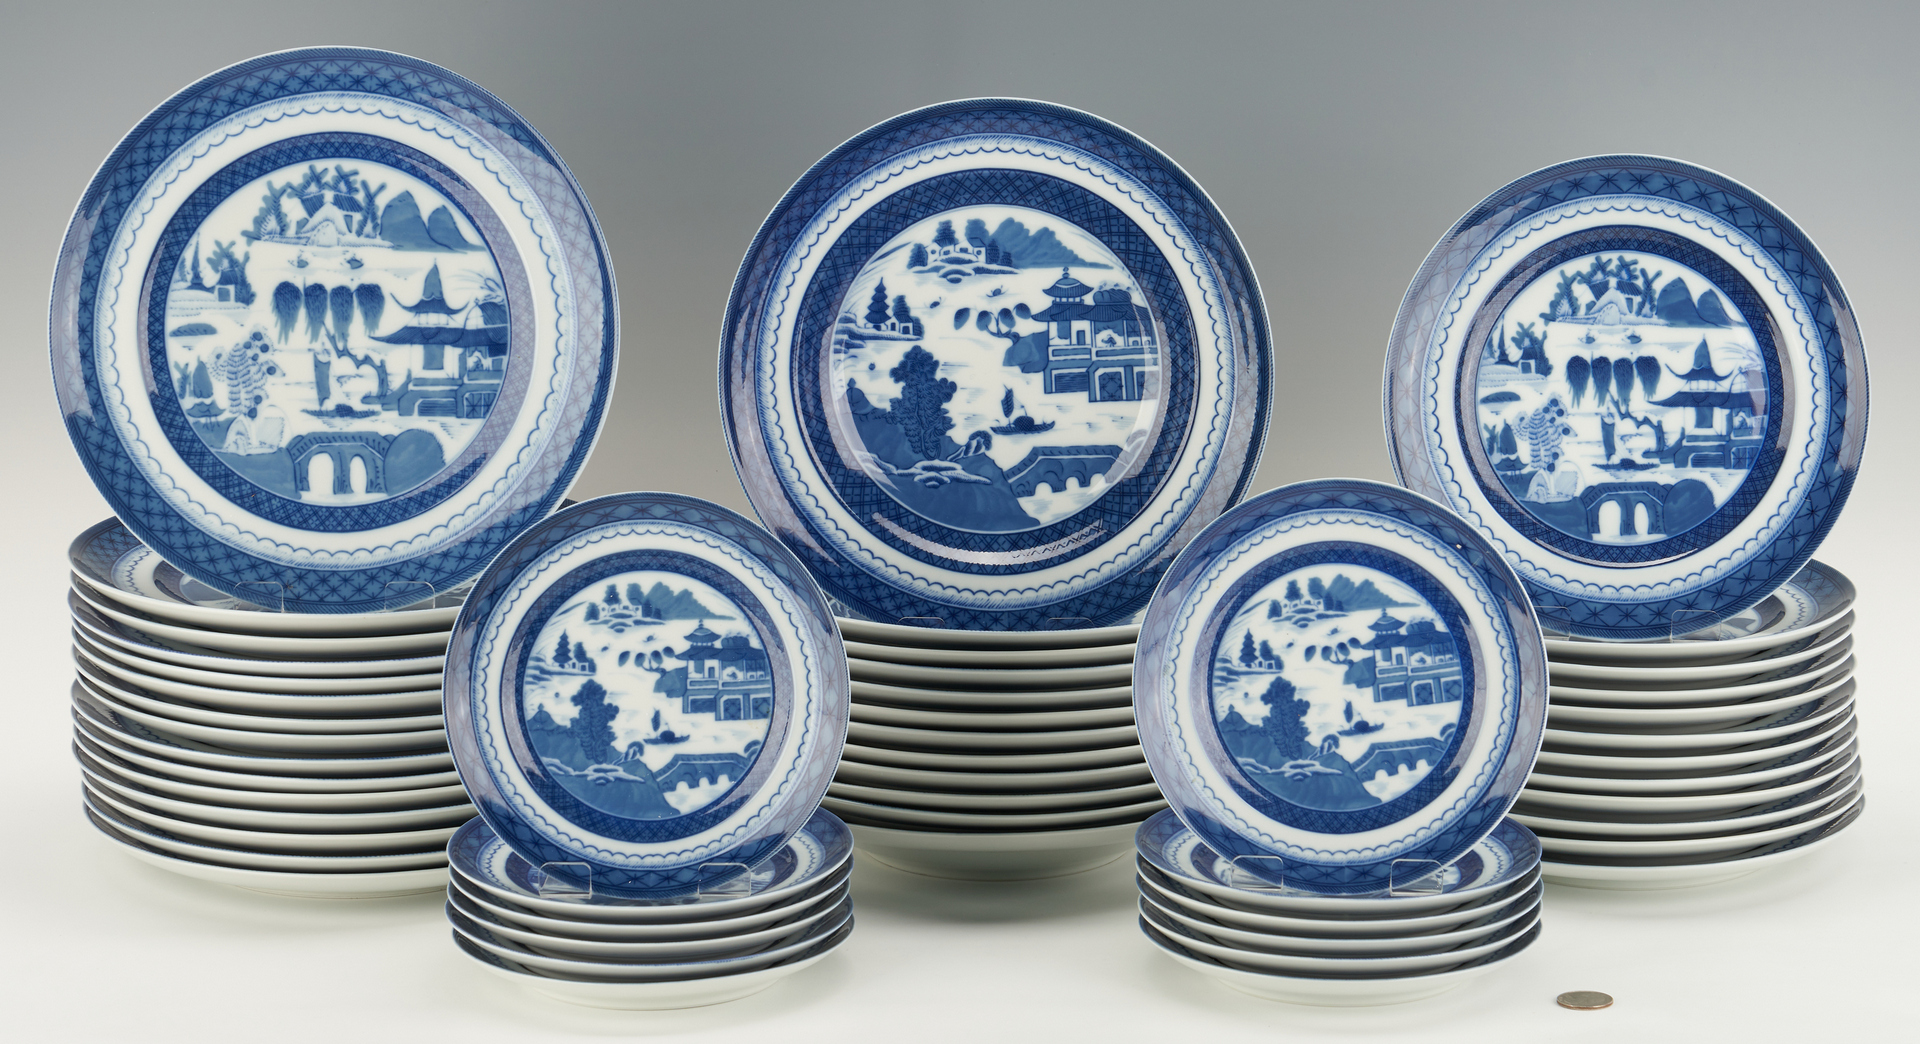 Lot 318: Mottahedeh Blue Canton Dinner Service for 12